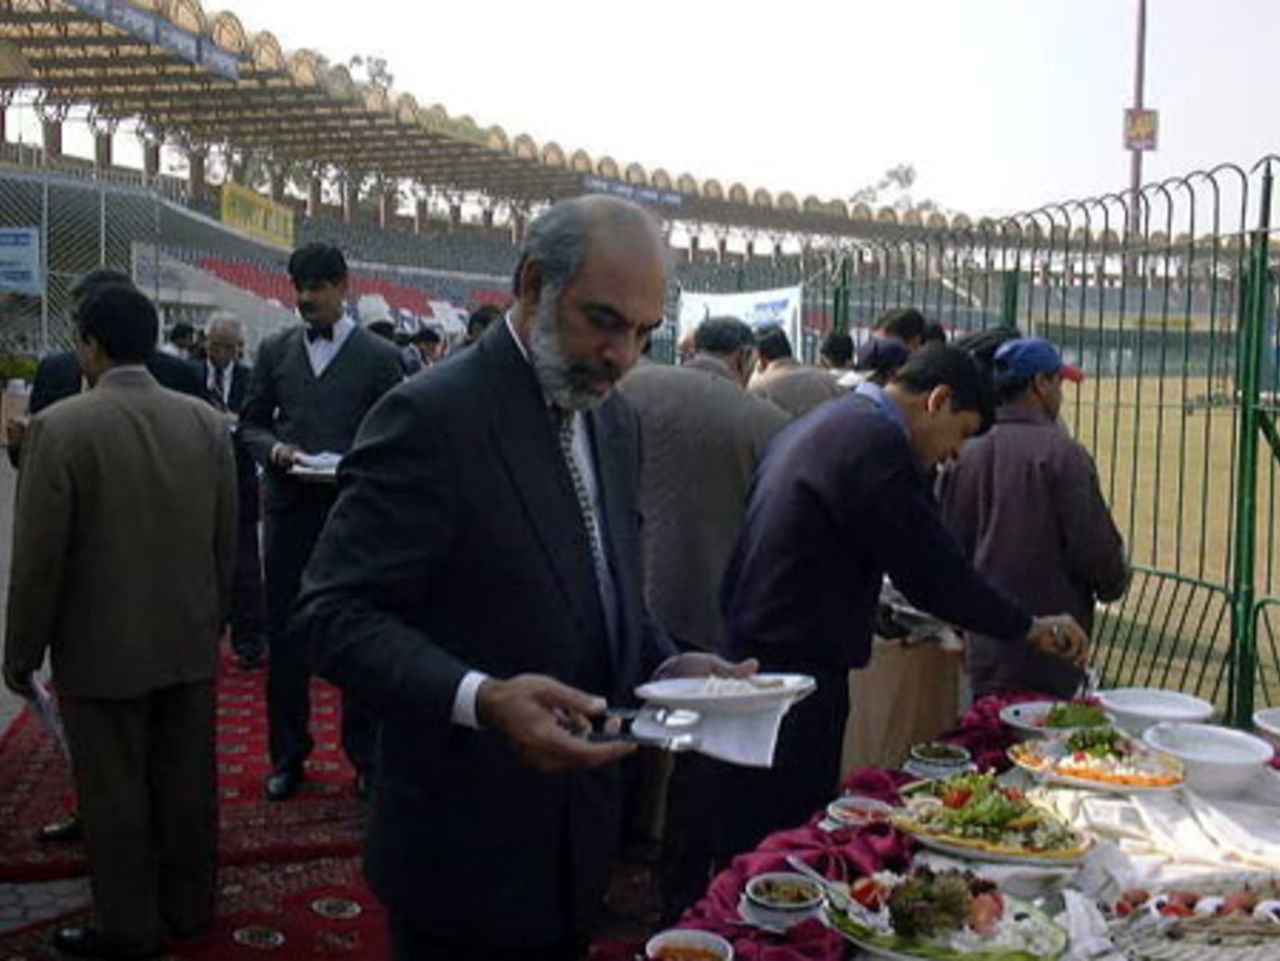 Guests at lunch after the PCB - CricInfo Internet Rights Acquisition Ceremony at Gaddafi Stadium, Lahore 5 Feb 2001